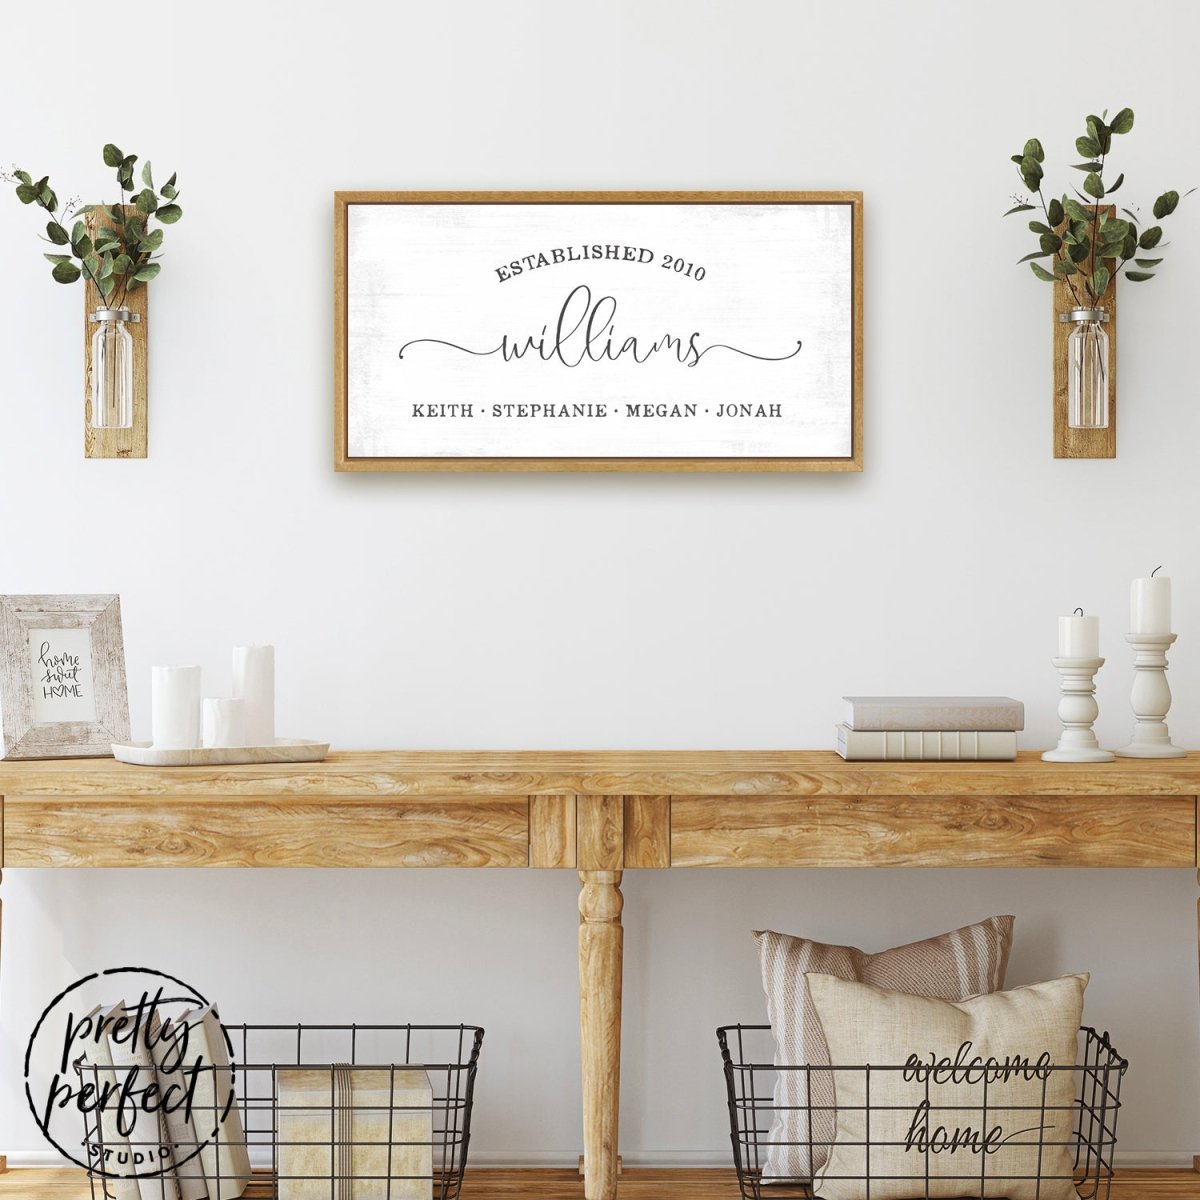 Personalized Family Names Wall Art With Established Date Above Entryway Table - Pretty Perfect Studio